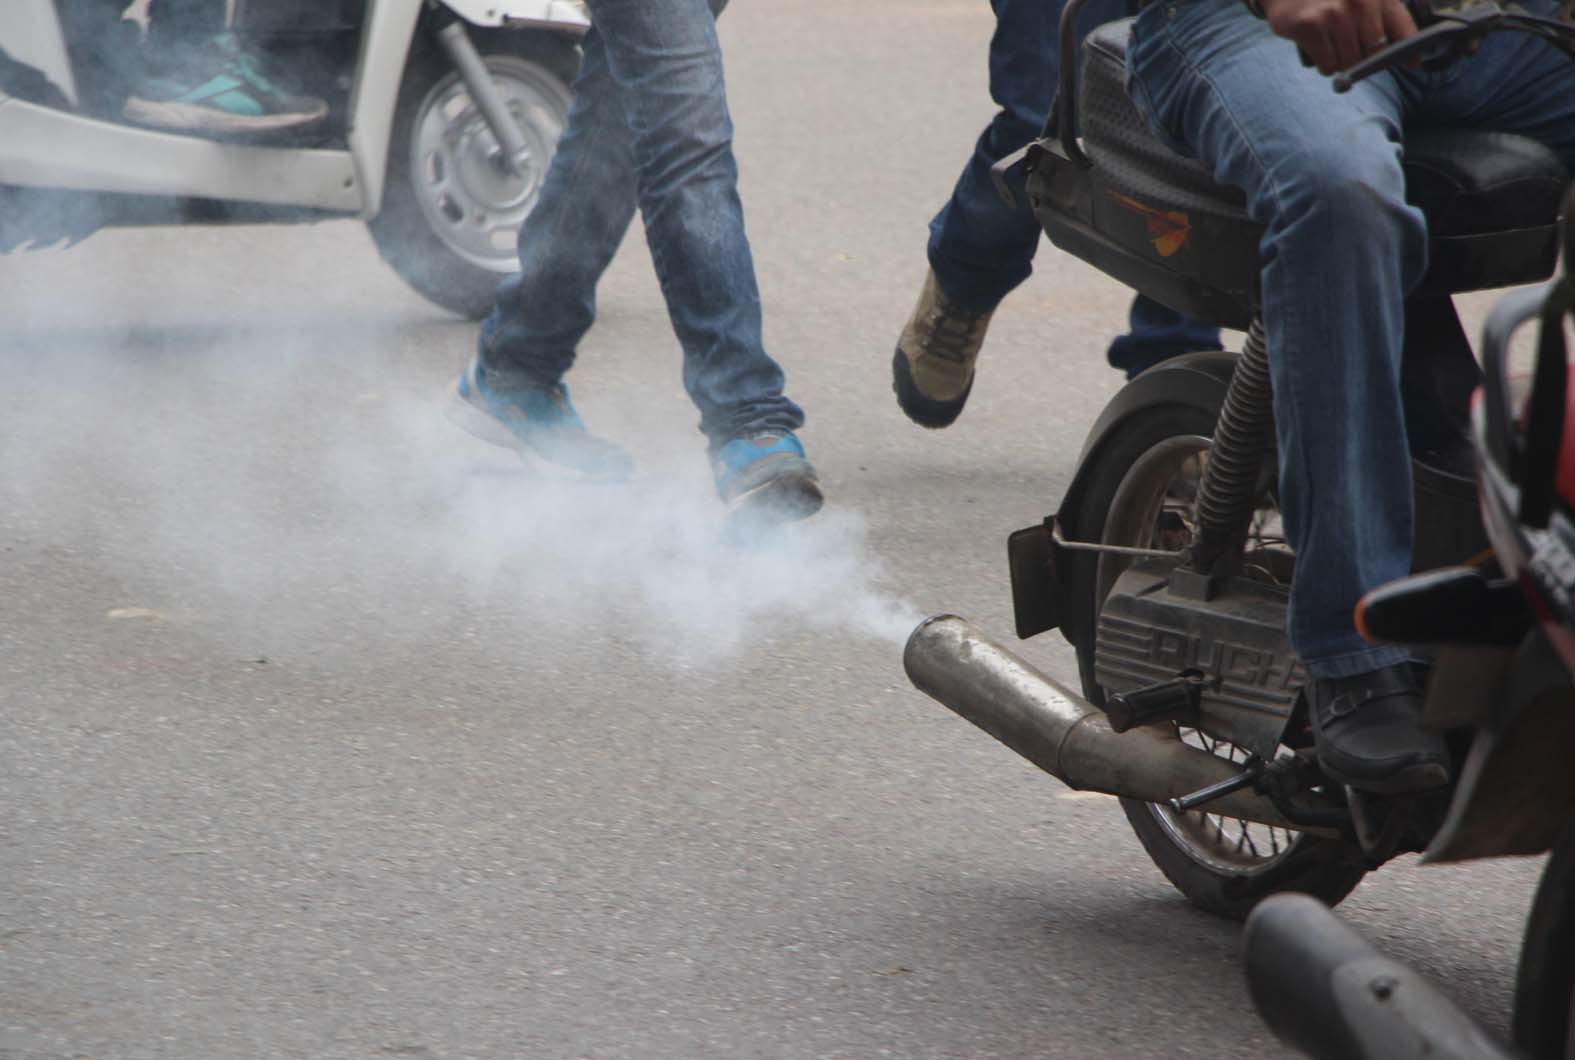 A motor cycle blowing exhaust in Jammu, which struggles with air pollution